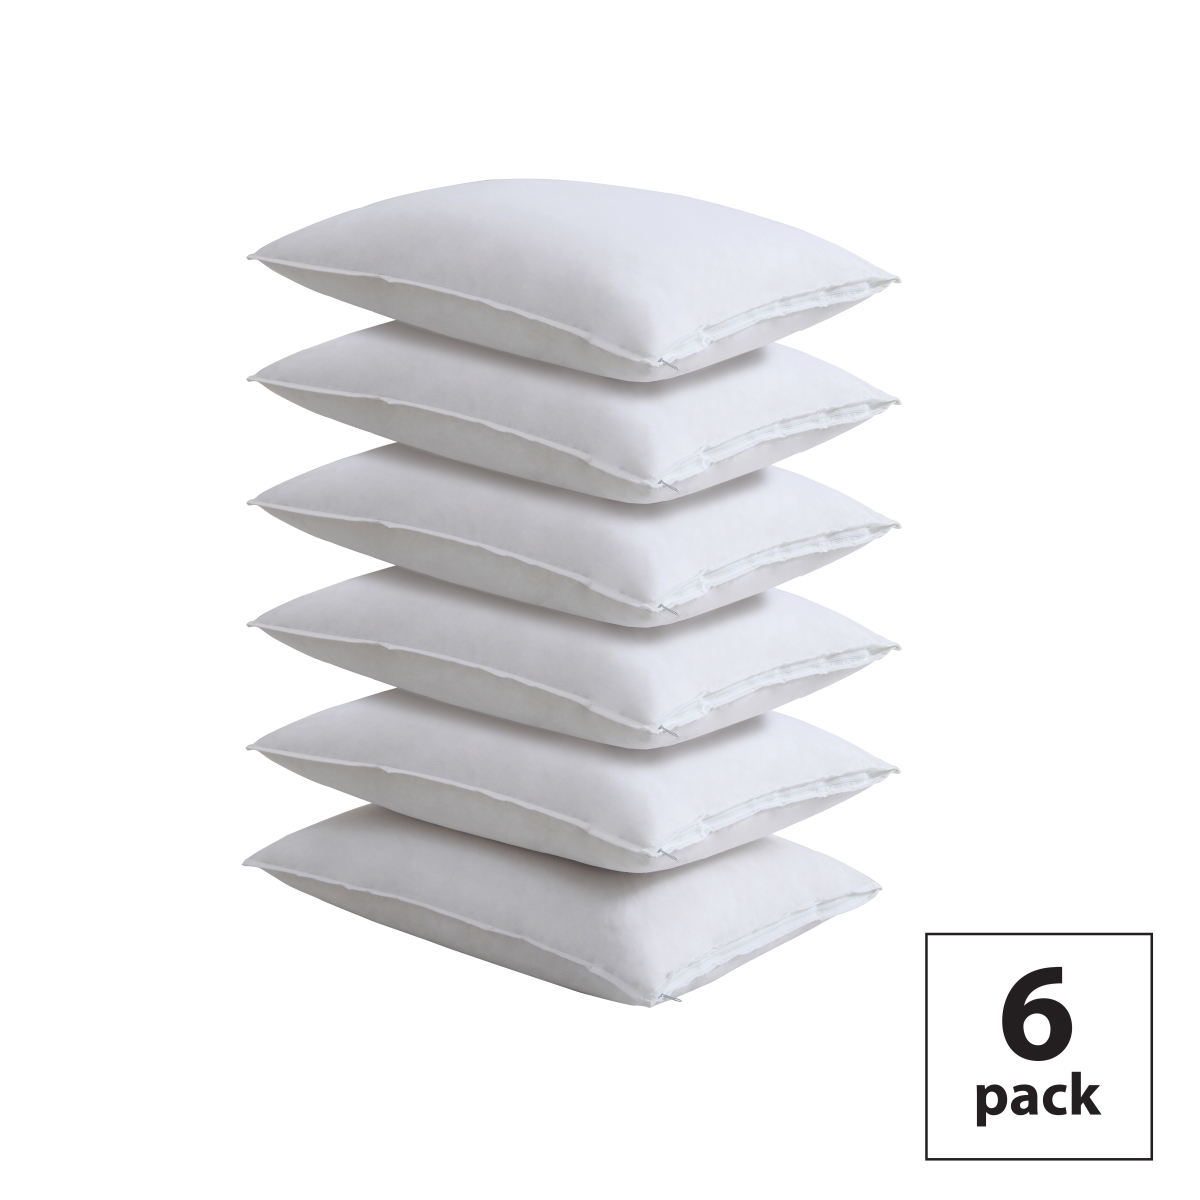 Fre10006whit09 100 Percent Cotton Pillow Protectors, King Size - Pack Of 6